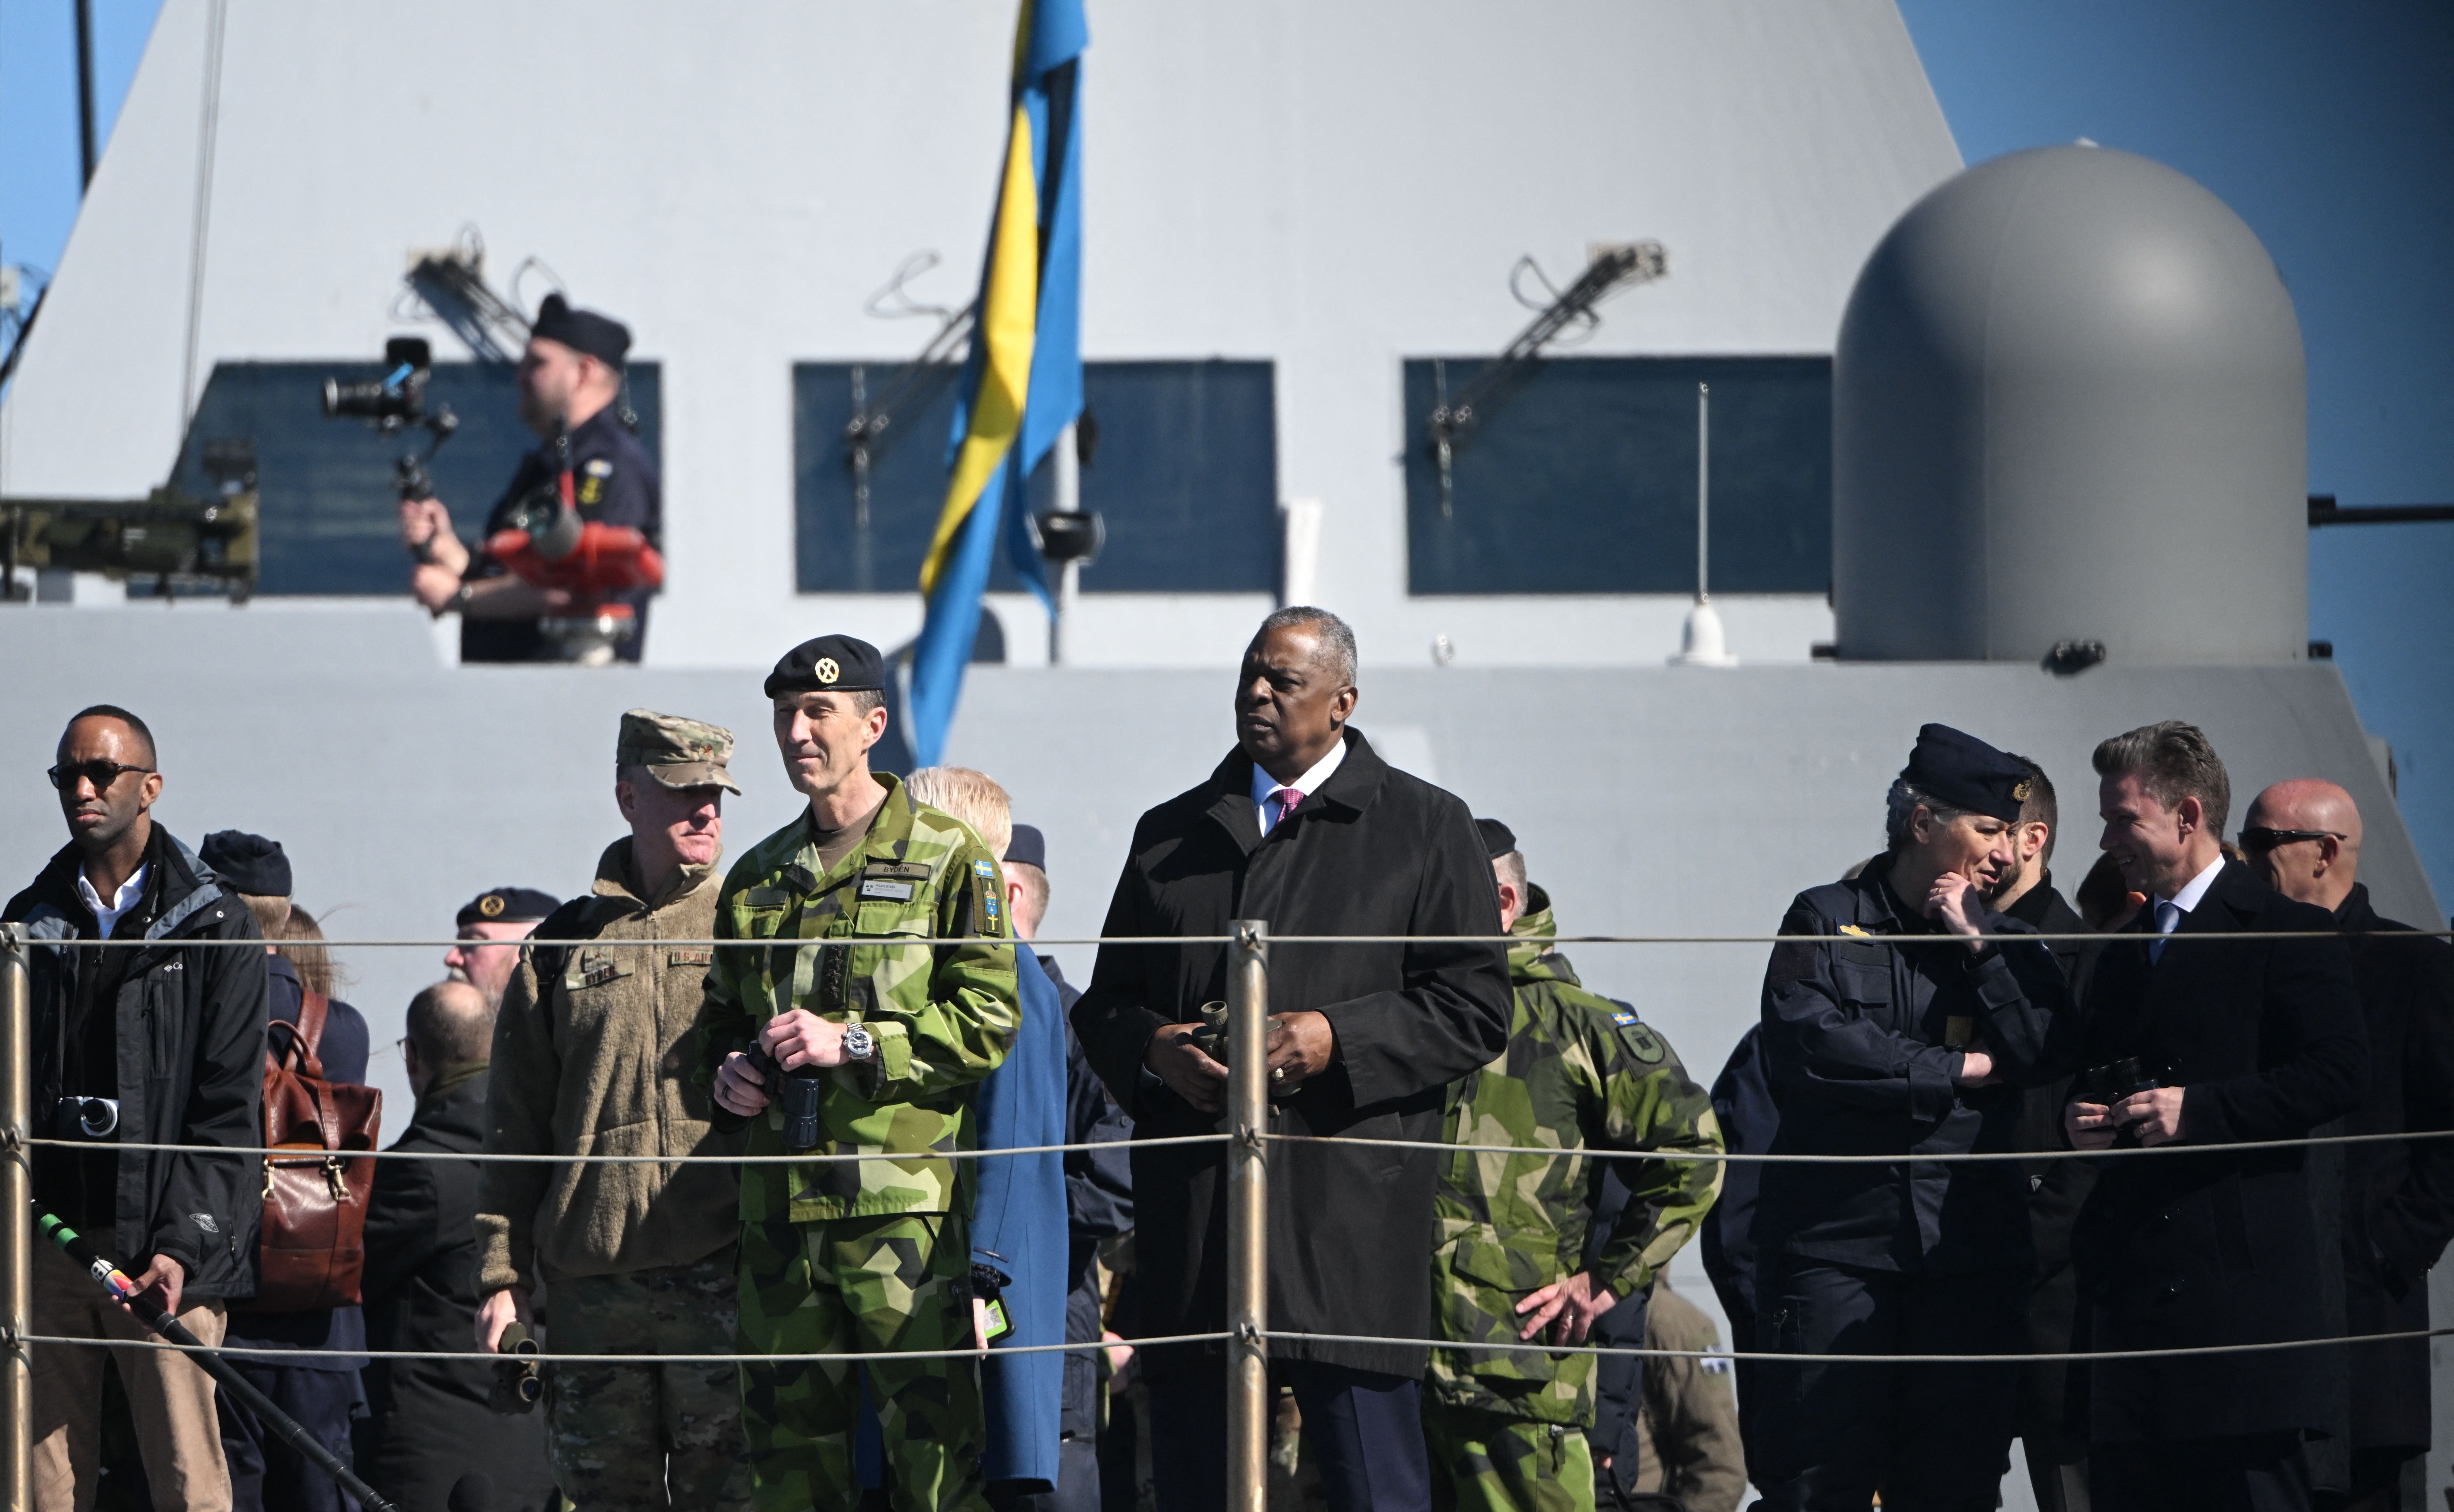 Supreme Commander of the Swedish Armed Forces General Micael Byden (C-L), Swedish Defence Minister Pal Jonson (C) and US Secretary of Defense Lloyd Austin (R) stand aboard the Visby-class corvette HMS Härnösand (K33) at the Musko Naval Base, south of Stockholm, on April 19, 2023. (Photo by Fredrik SANDBERG / TT NEWS AGENCY / AFP) / Sweden OUT (Photo by FREDRIK SANDBERG/TT NEWS AGENCY/AFP via Getty Images)